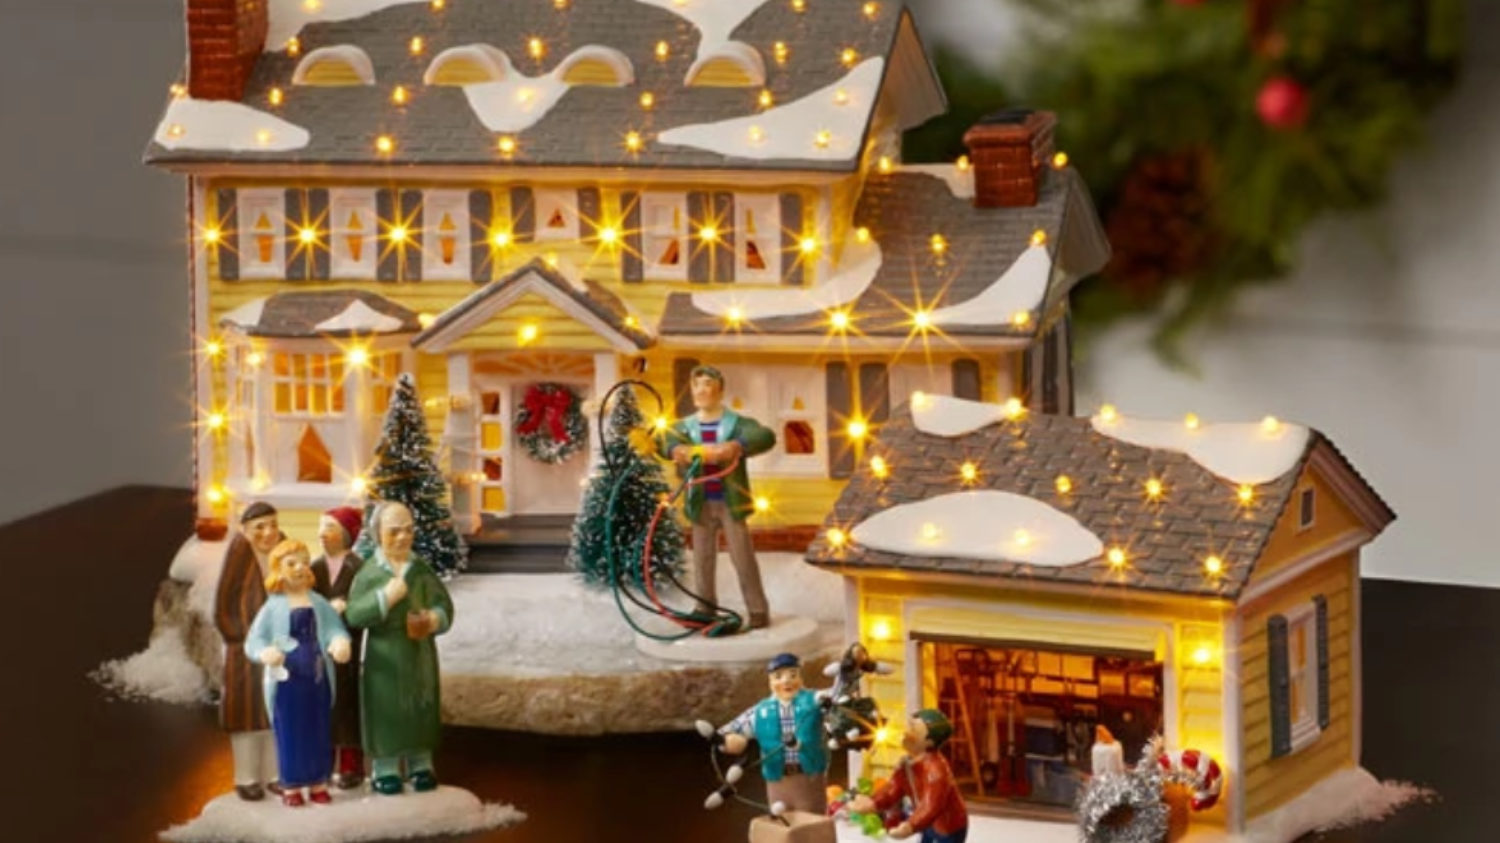 Christmas Vacation Village Decoration Holiday House Lighted Building Celebrating Holidays Xmas Resin Ornaments Snow The Griswold Holiday Garage Lit Building Gifts Decorations 